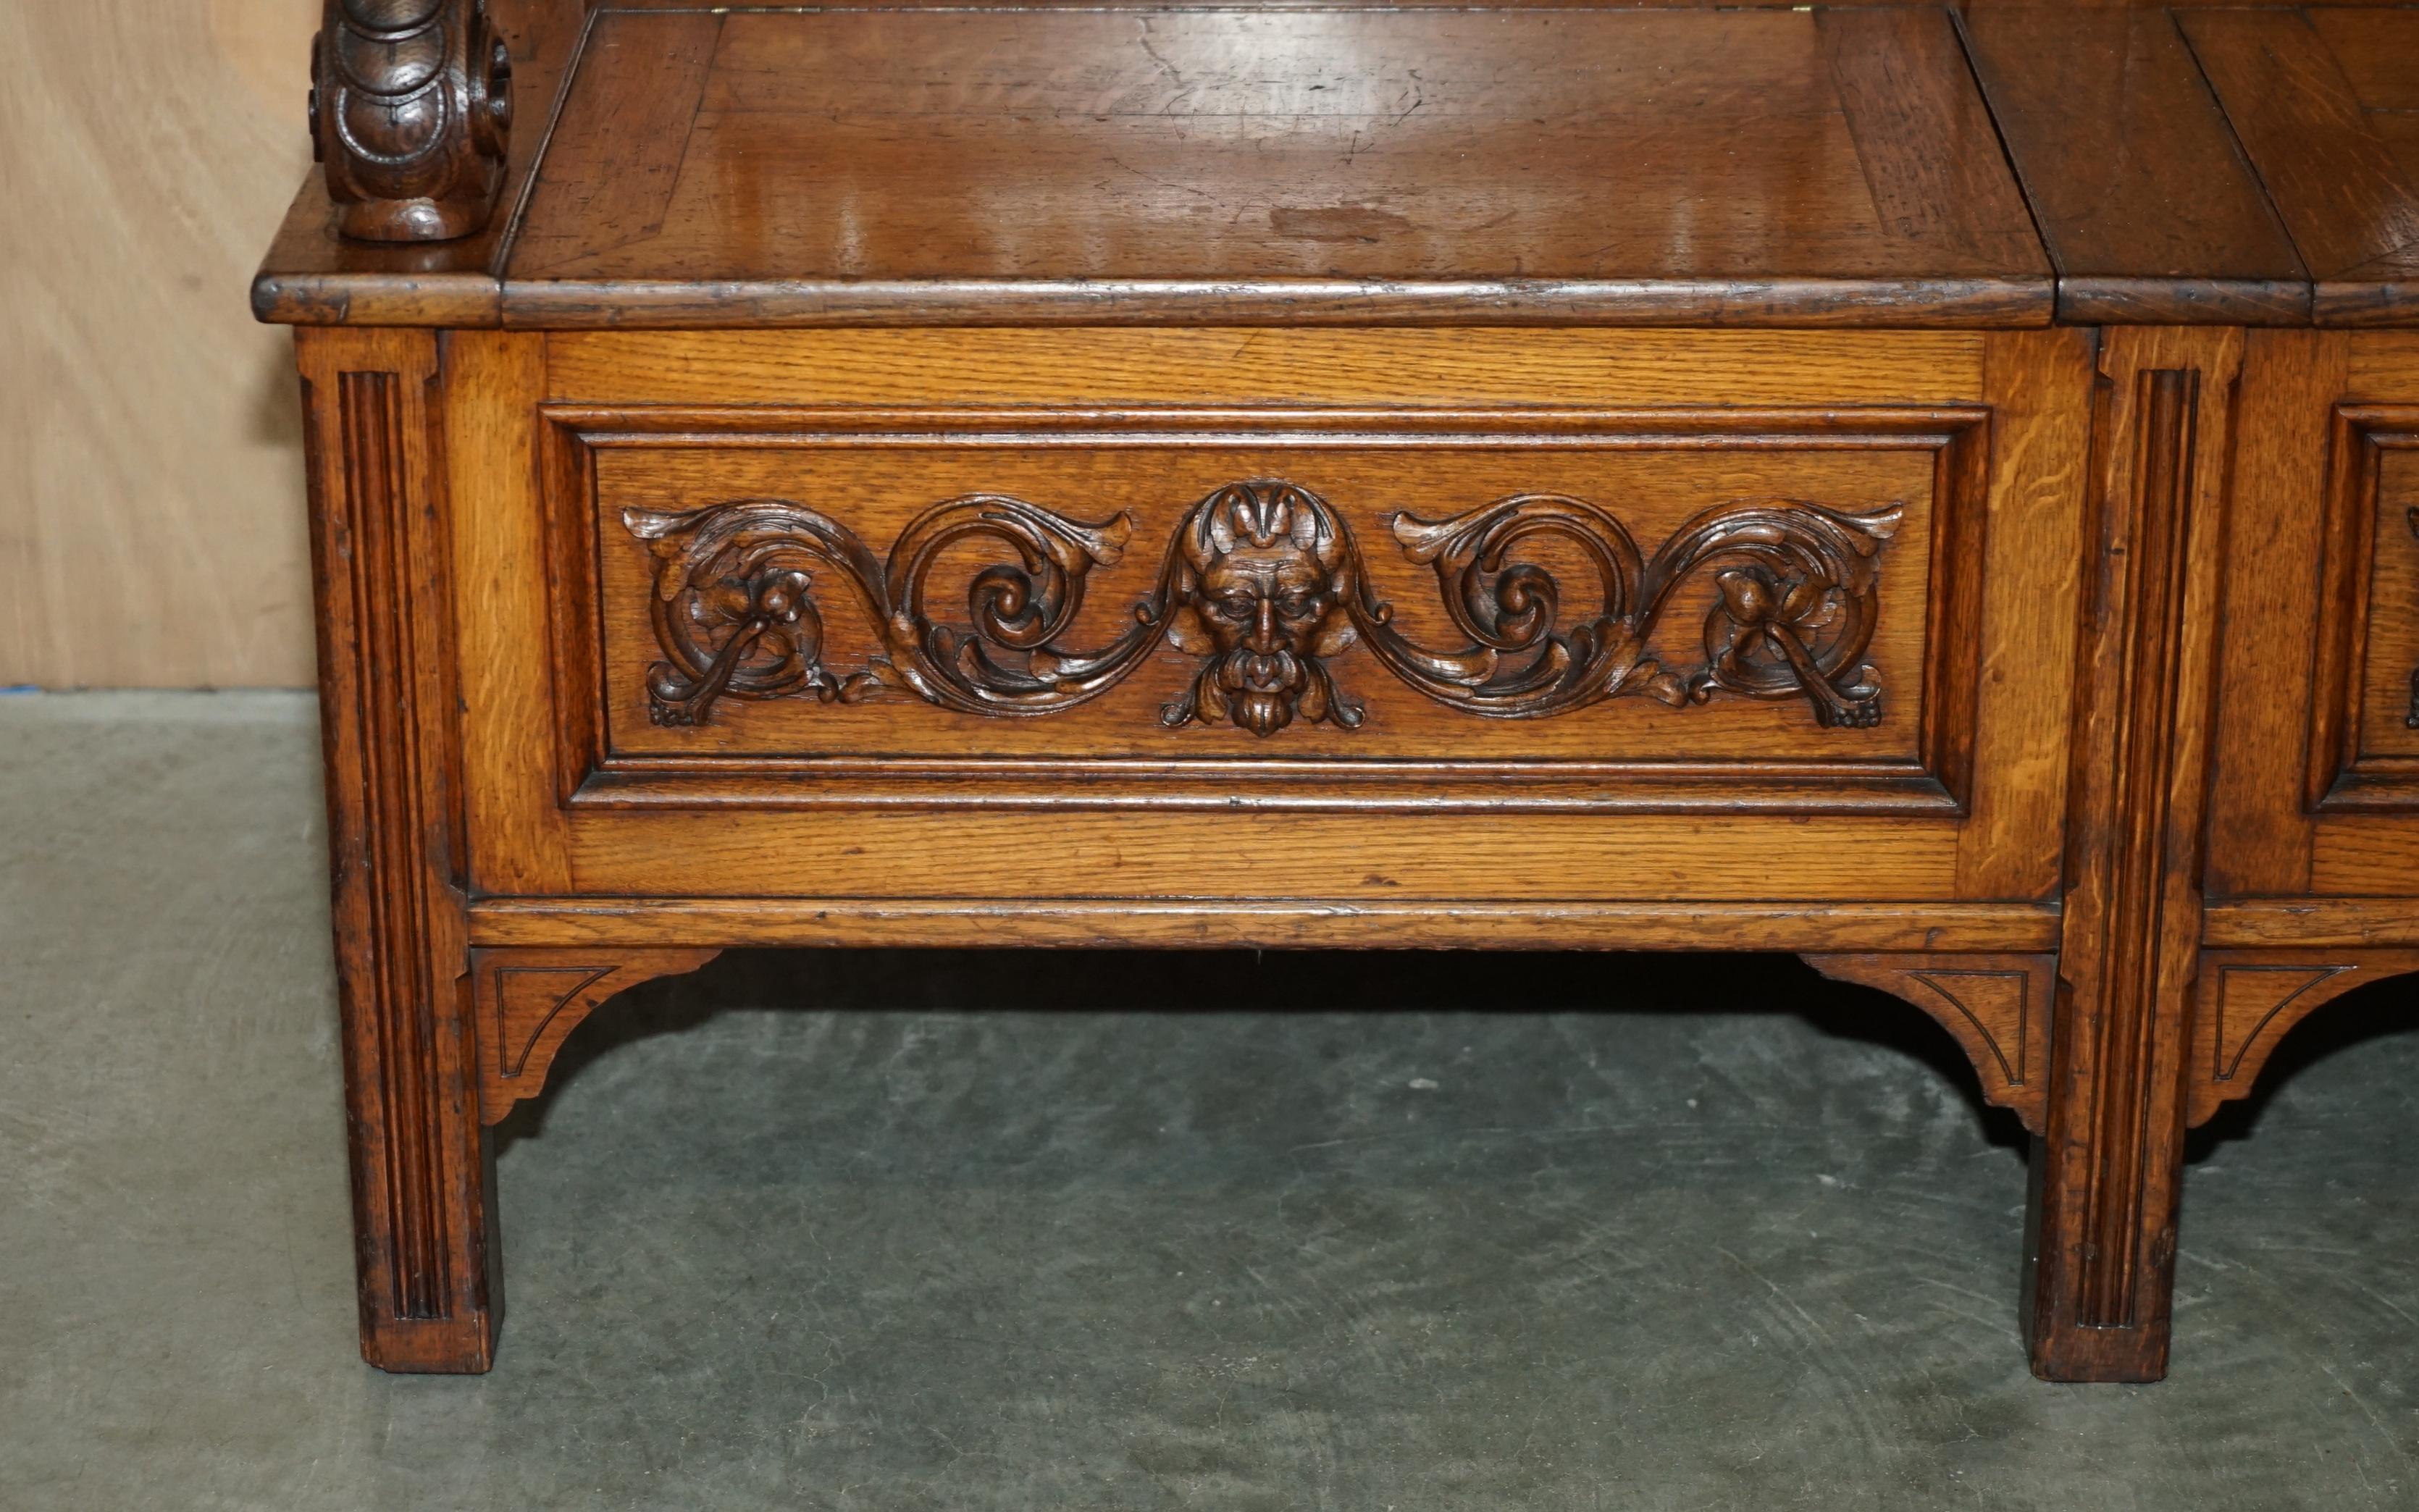 Hand-Crafted FiNEST QUALITY HAMPTON & SON'S ANTIQUE VICTORIAN WALNUT HAND CARVED BACON SETTLE For Sale